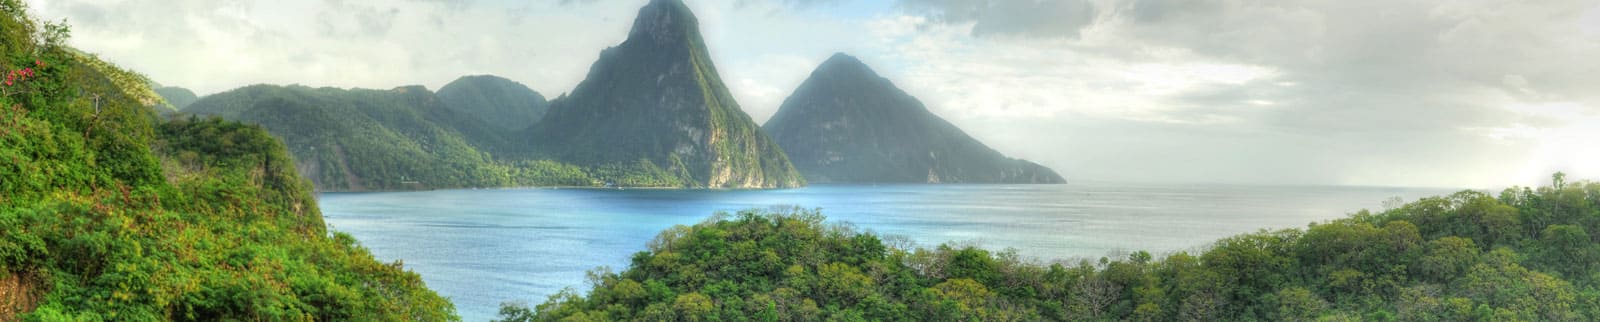 cruise including st lucia